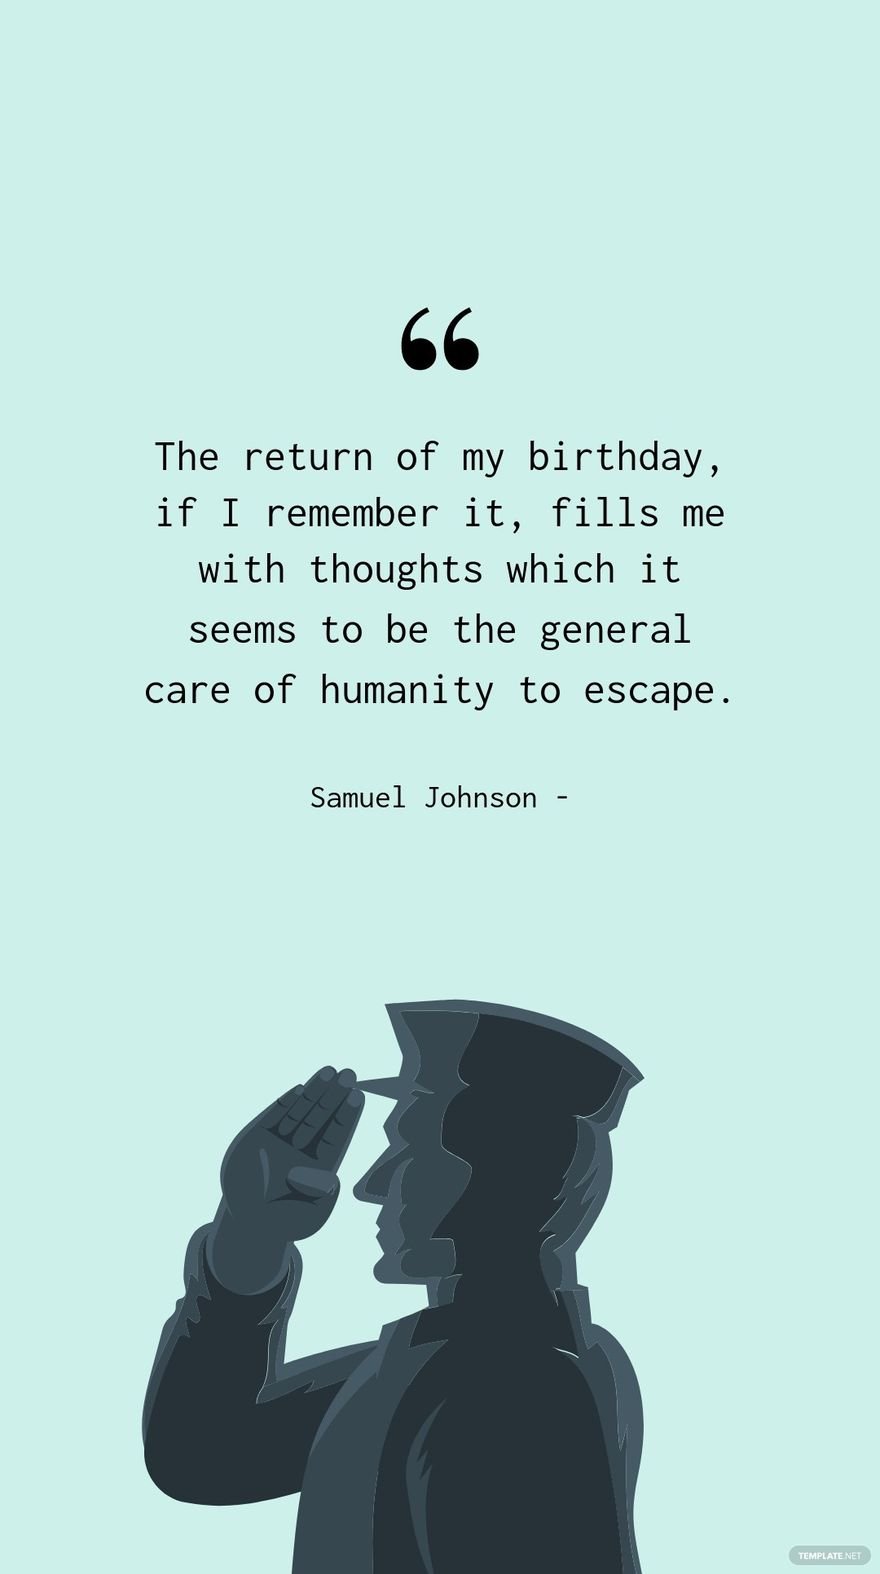 Samuel Johnson - The return of my birthday, if I remember it, fills me with thoughts which it seems to be the general care of humanity to escape.